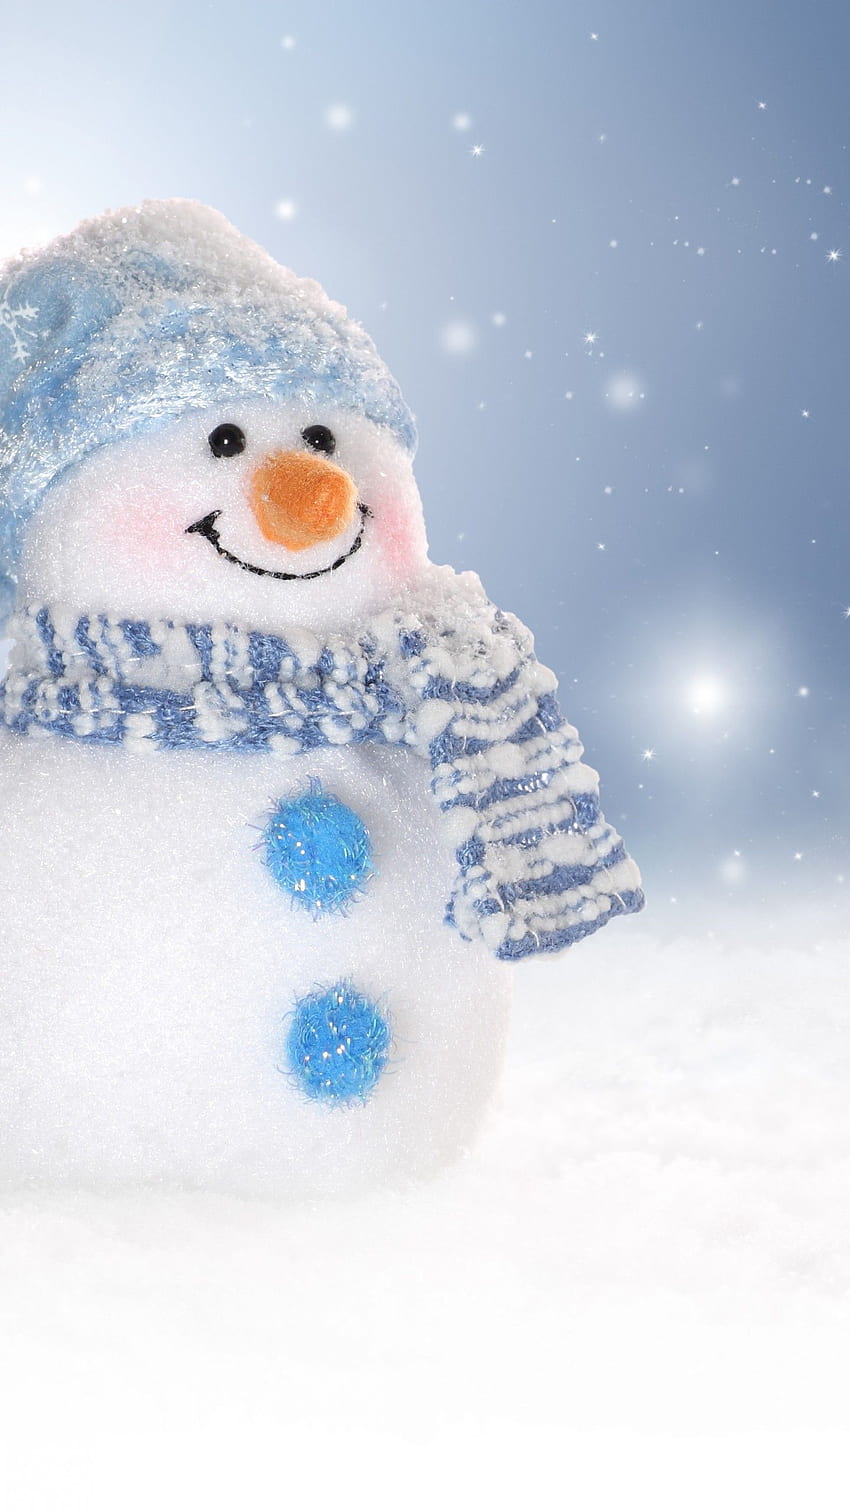 20+ Snowman wallpapers HD | Download Free backgrounds